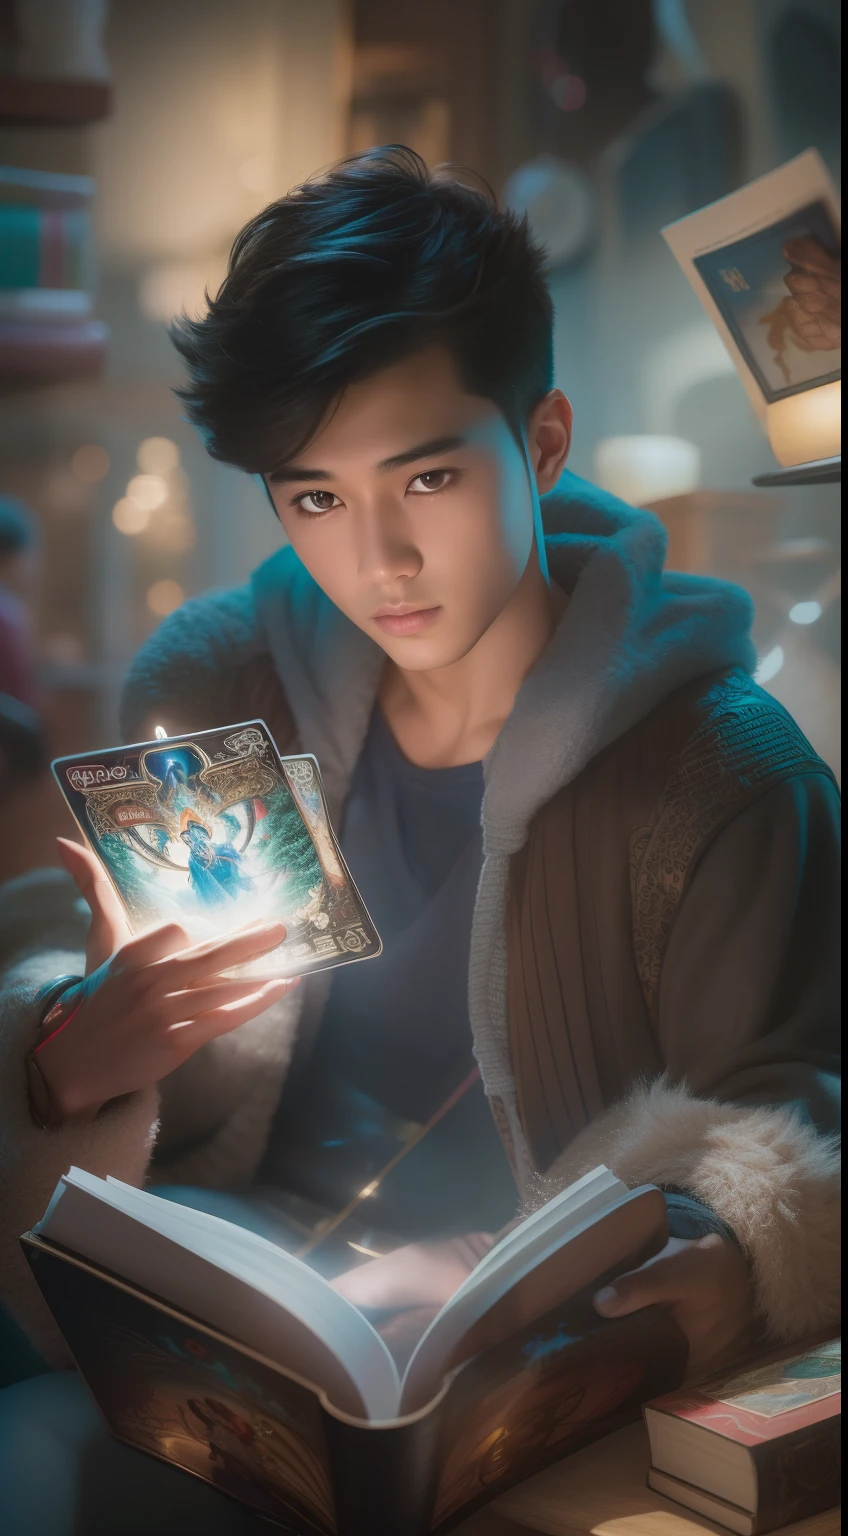 Detailed paintings depicting handsomeness, Young Asian man in casual clothes is assembled by a series of glowing magic cards and in the middle《dungeons and dragons》A book surrounded.